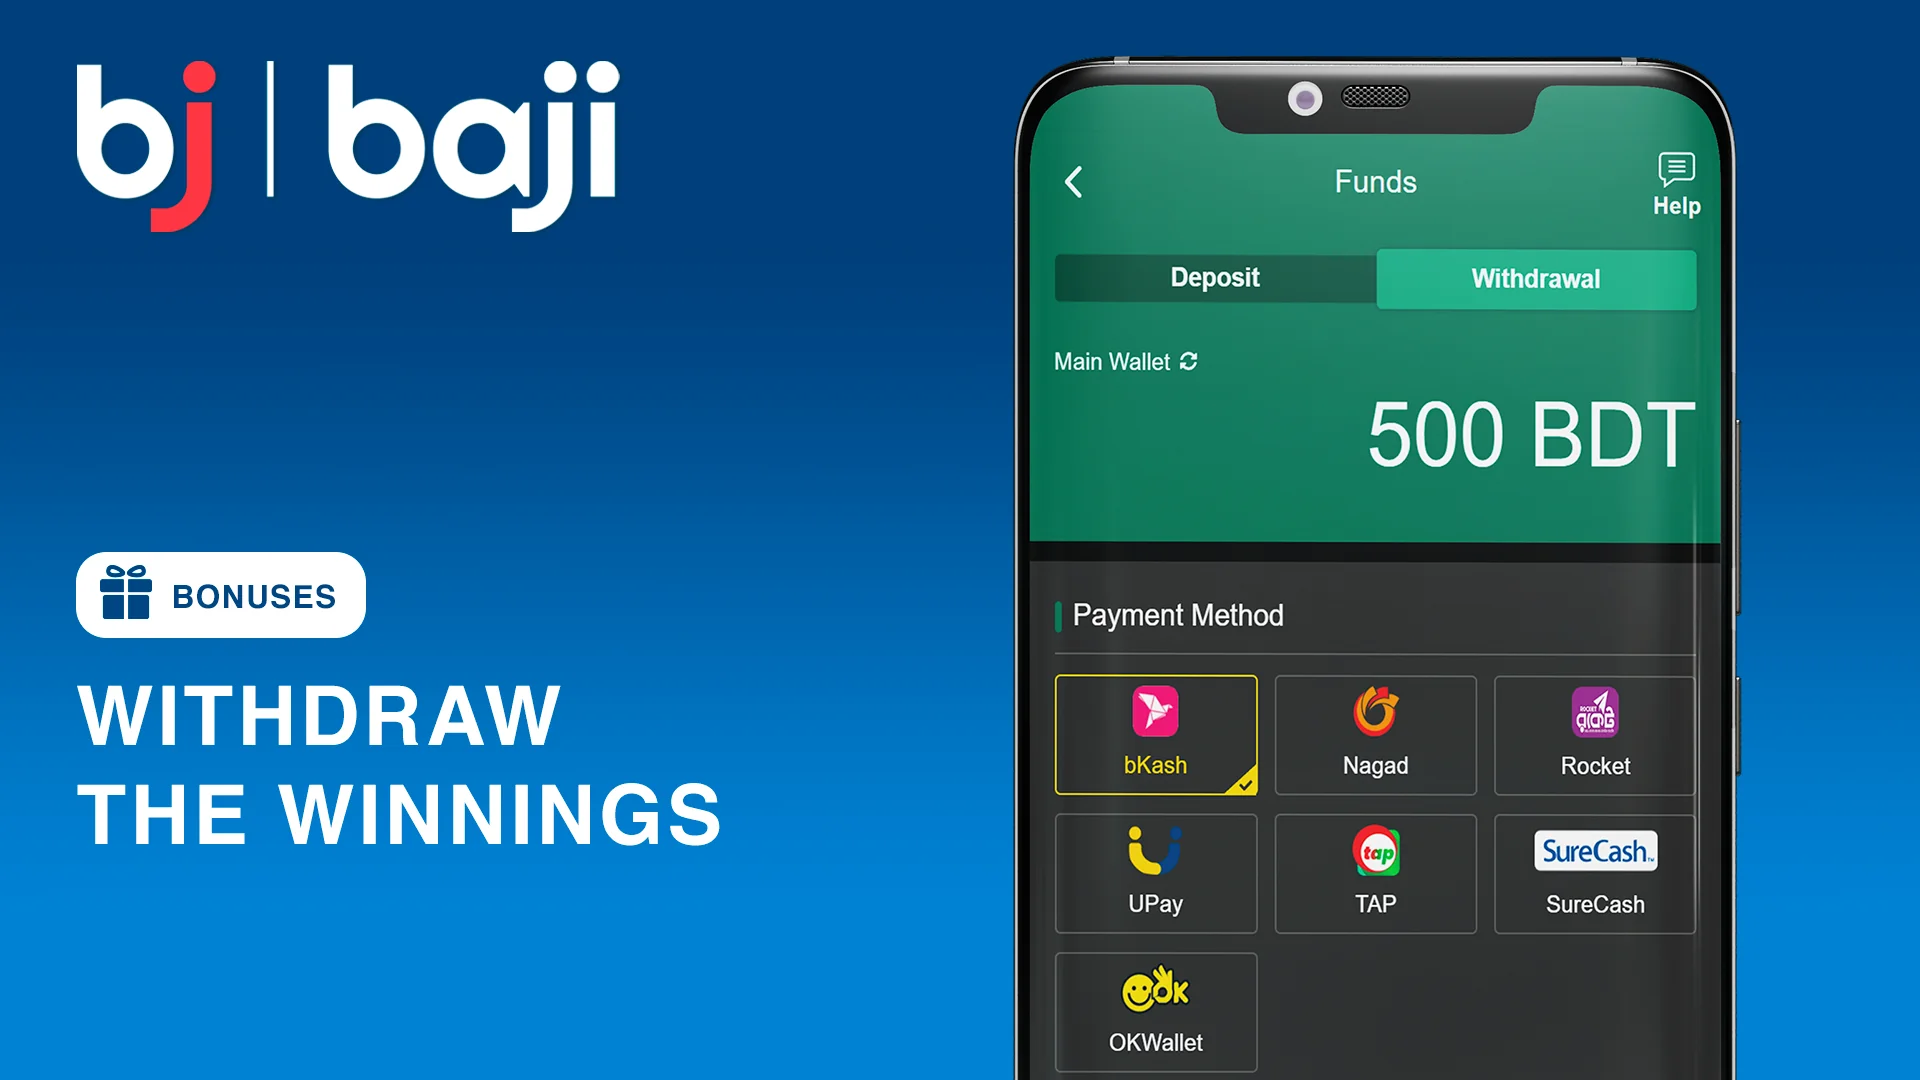 Play or Bet on Sports at Baji with Selected Bonuses and withdraw winnings